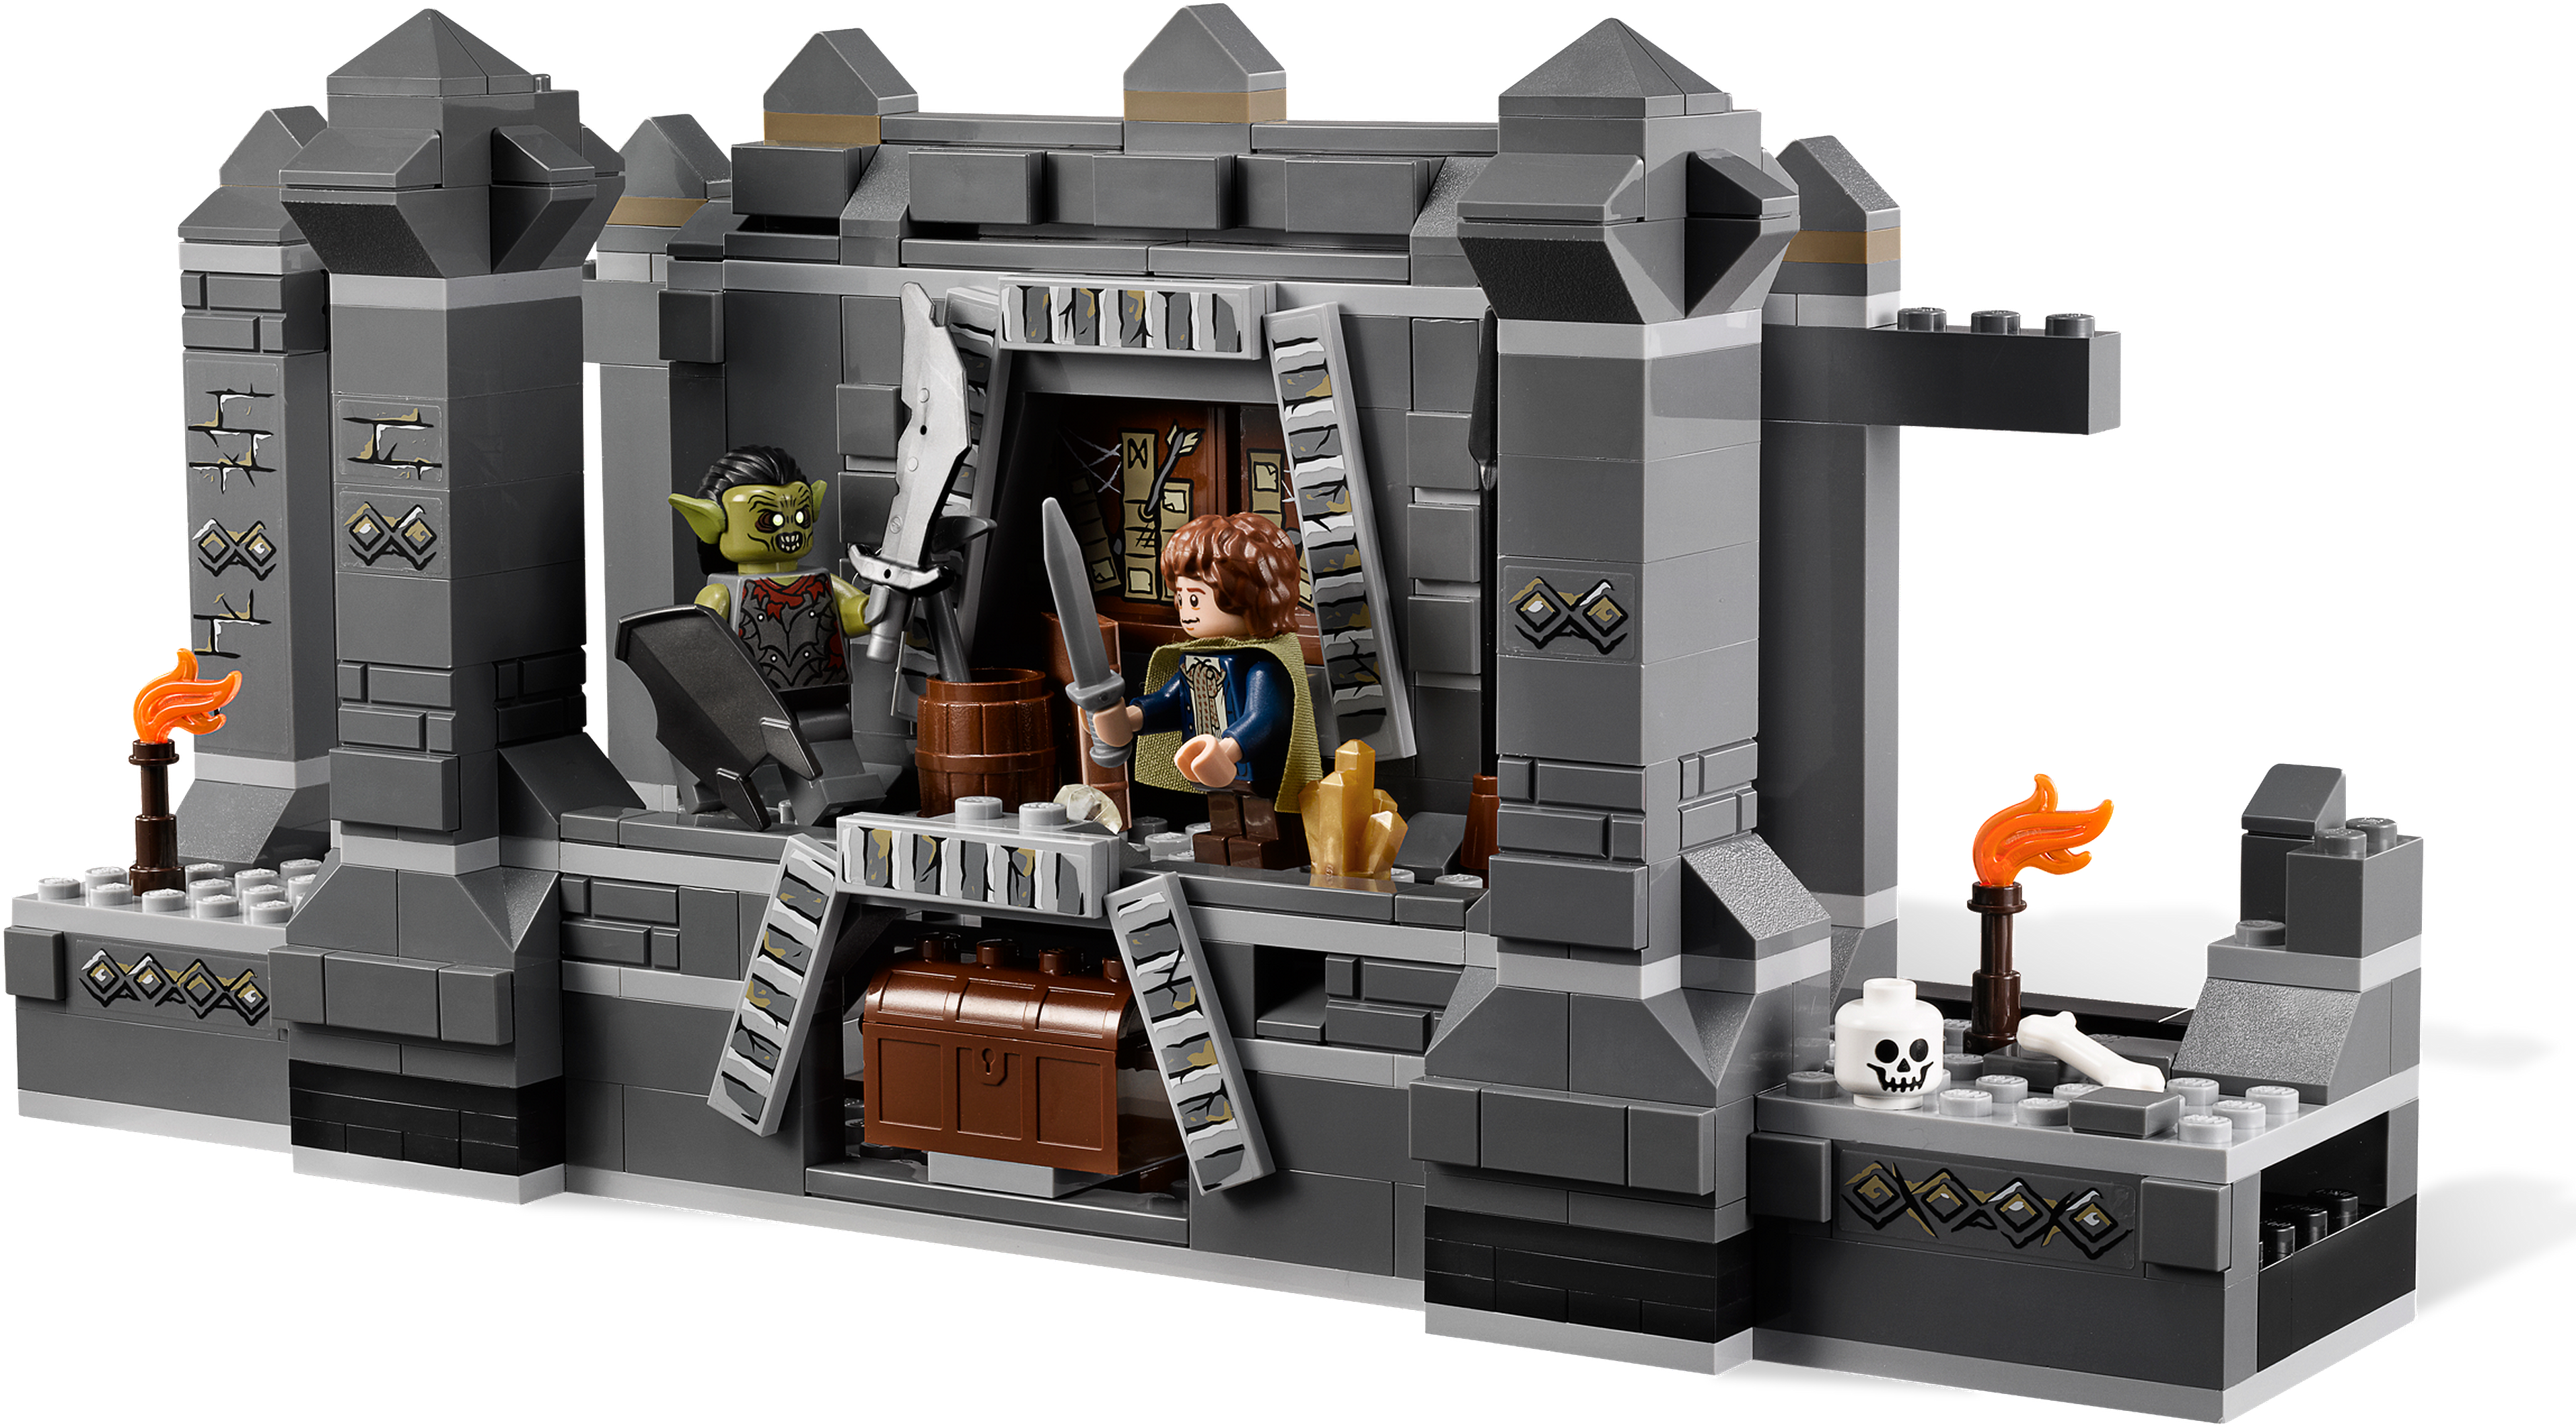 Full Resolution - Lego Lord Of The Rings : Mines Of Moria (4000x3000)